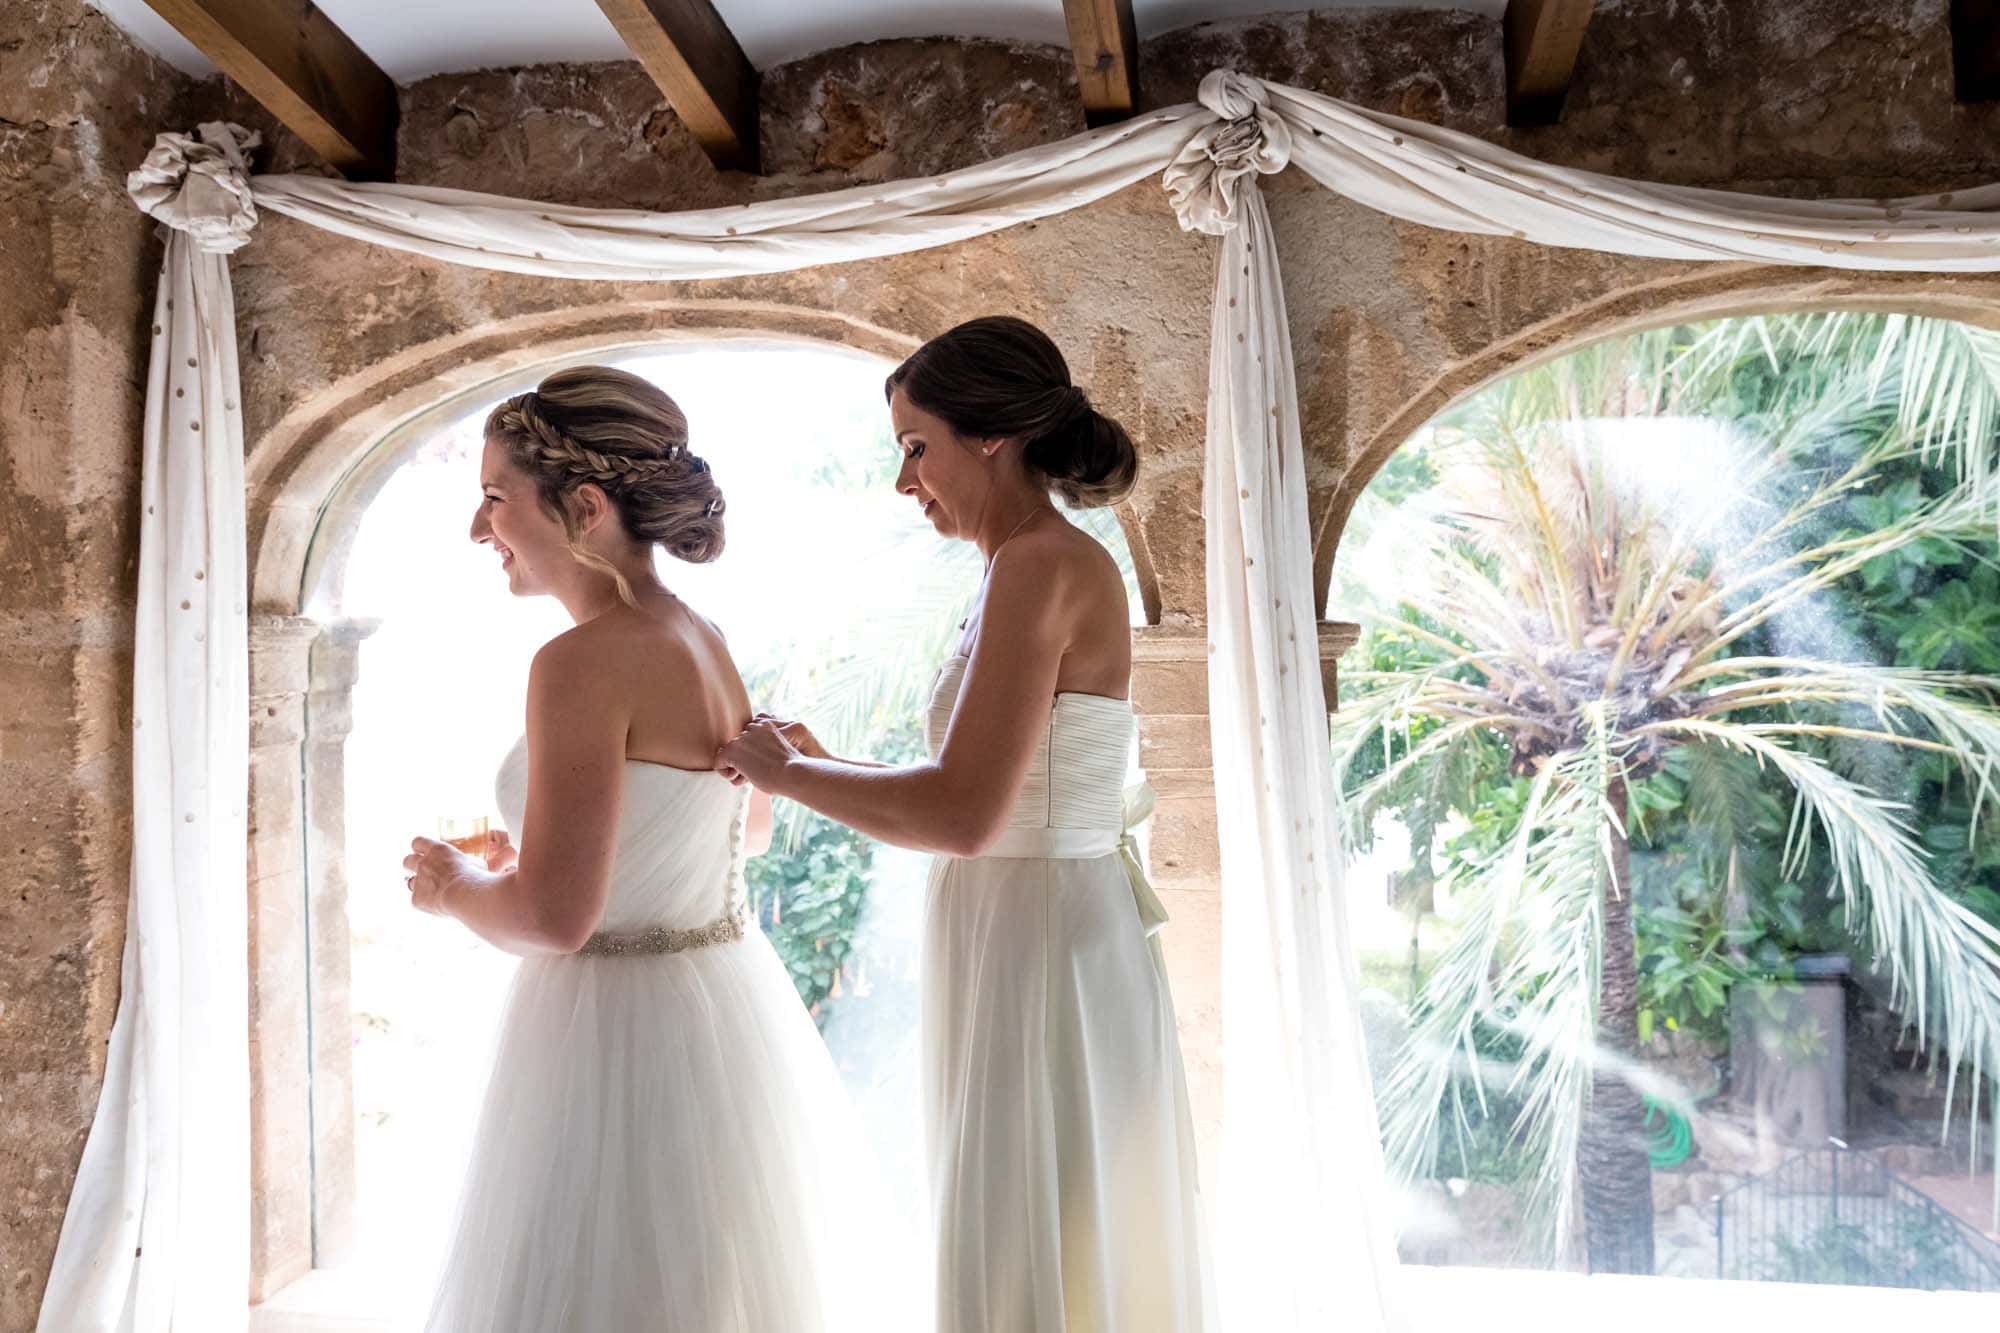 A bridesmaid helps the bride to put on her wedding dress at Hotel Can Vedera in Fornalutx